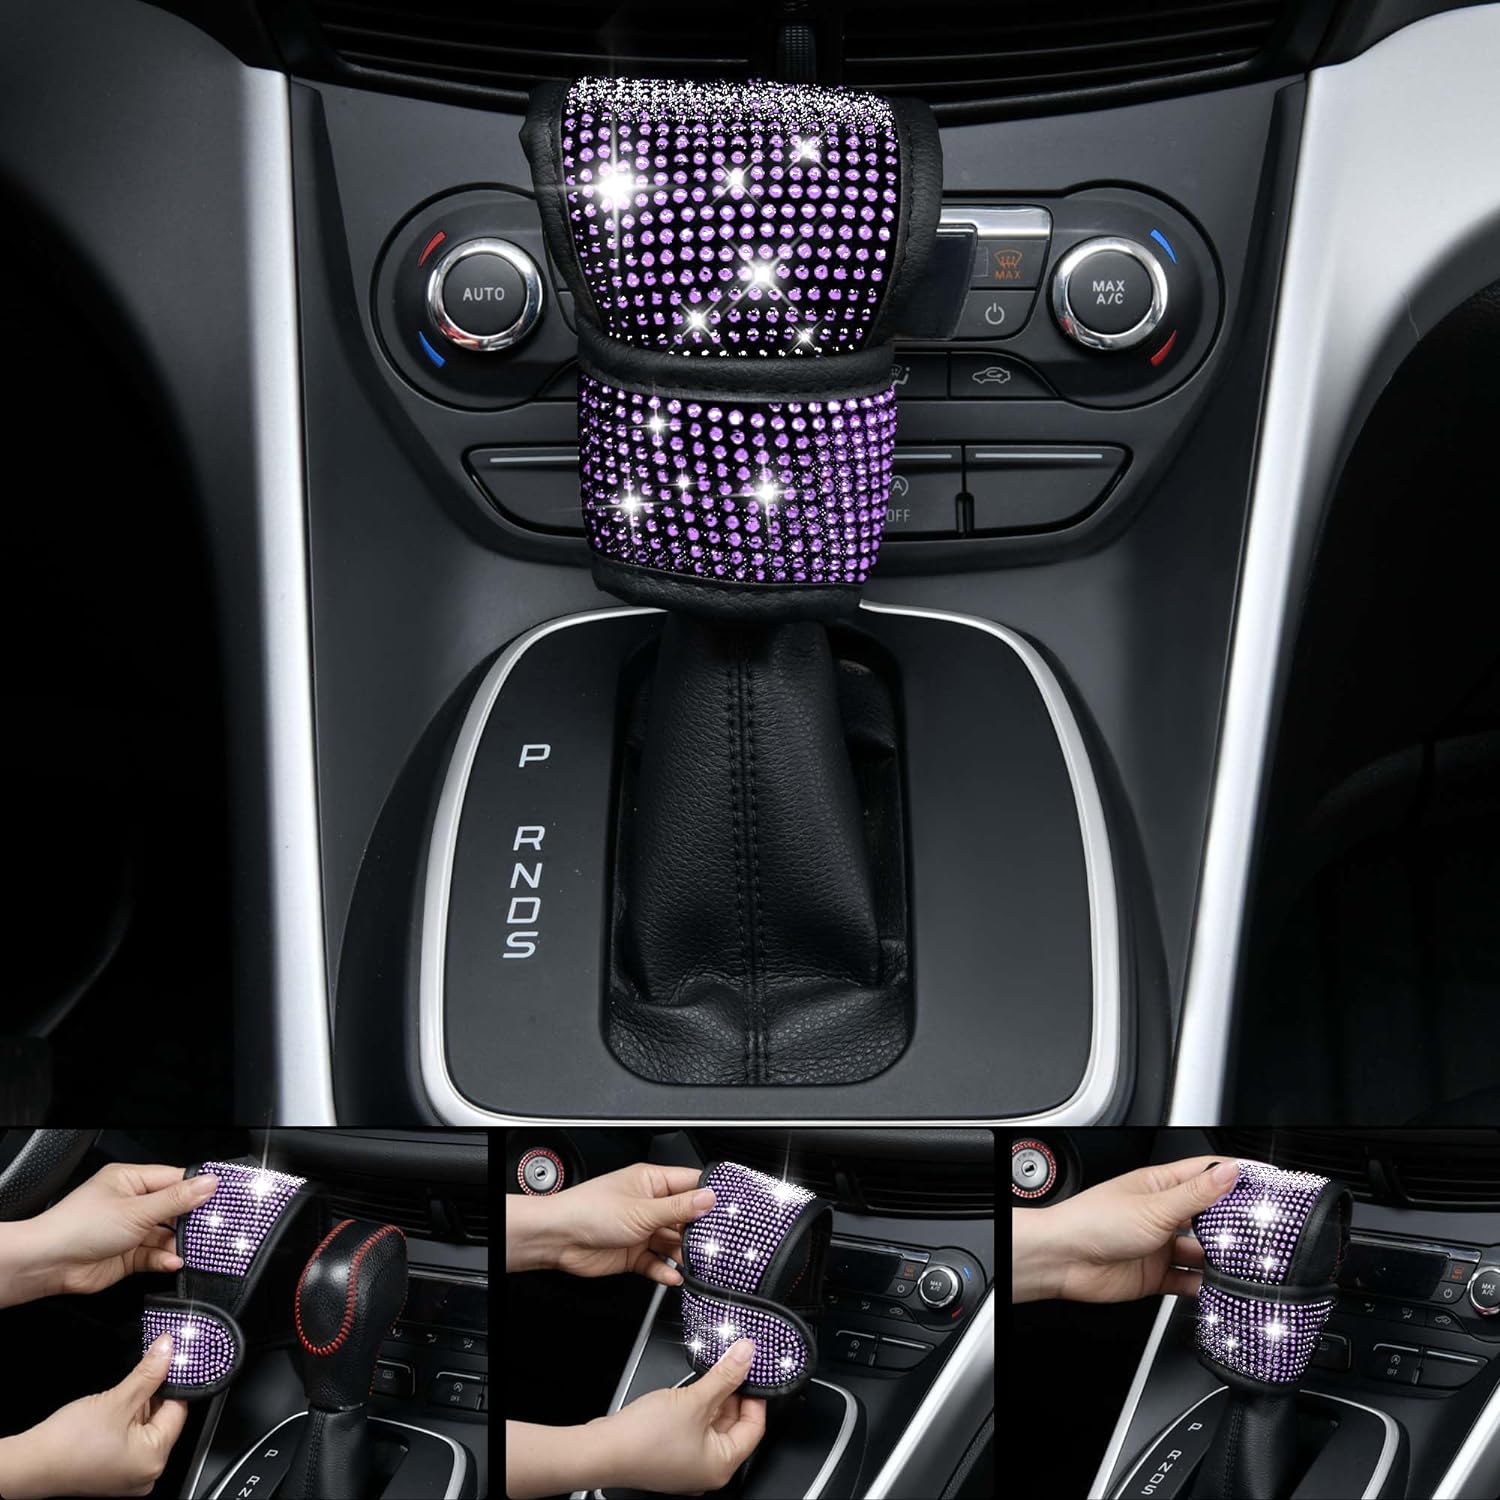 CAR PASS Leather Diamond Bling Seat Covers Sets 12 pcs, Bling Car Accessories Set for Women, Sparkly Rhinestone Steering Wheel Cover Sets, Glitter Cute Car Interior Sets for Women Girl, Silver Diamond